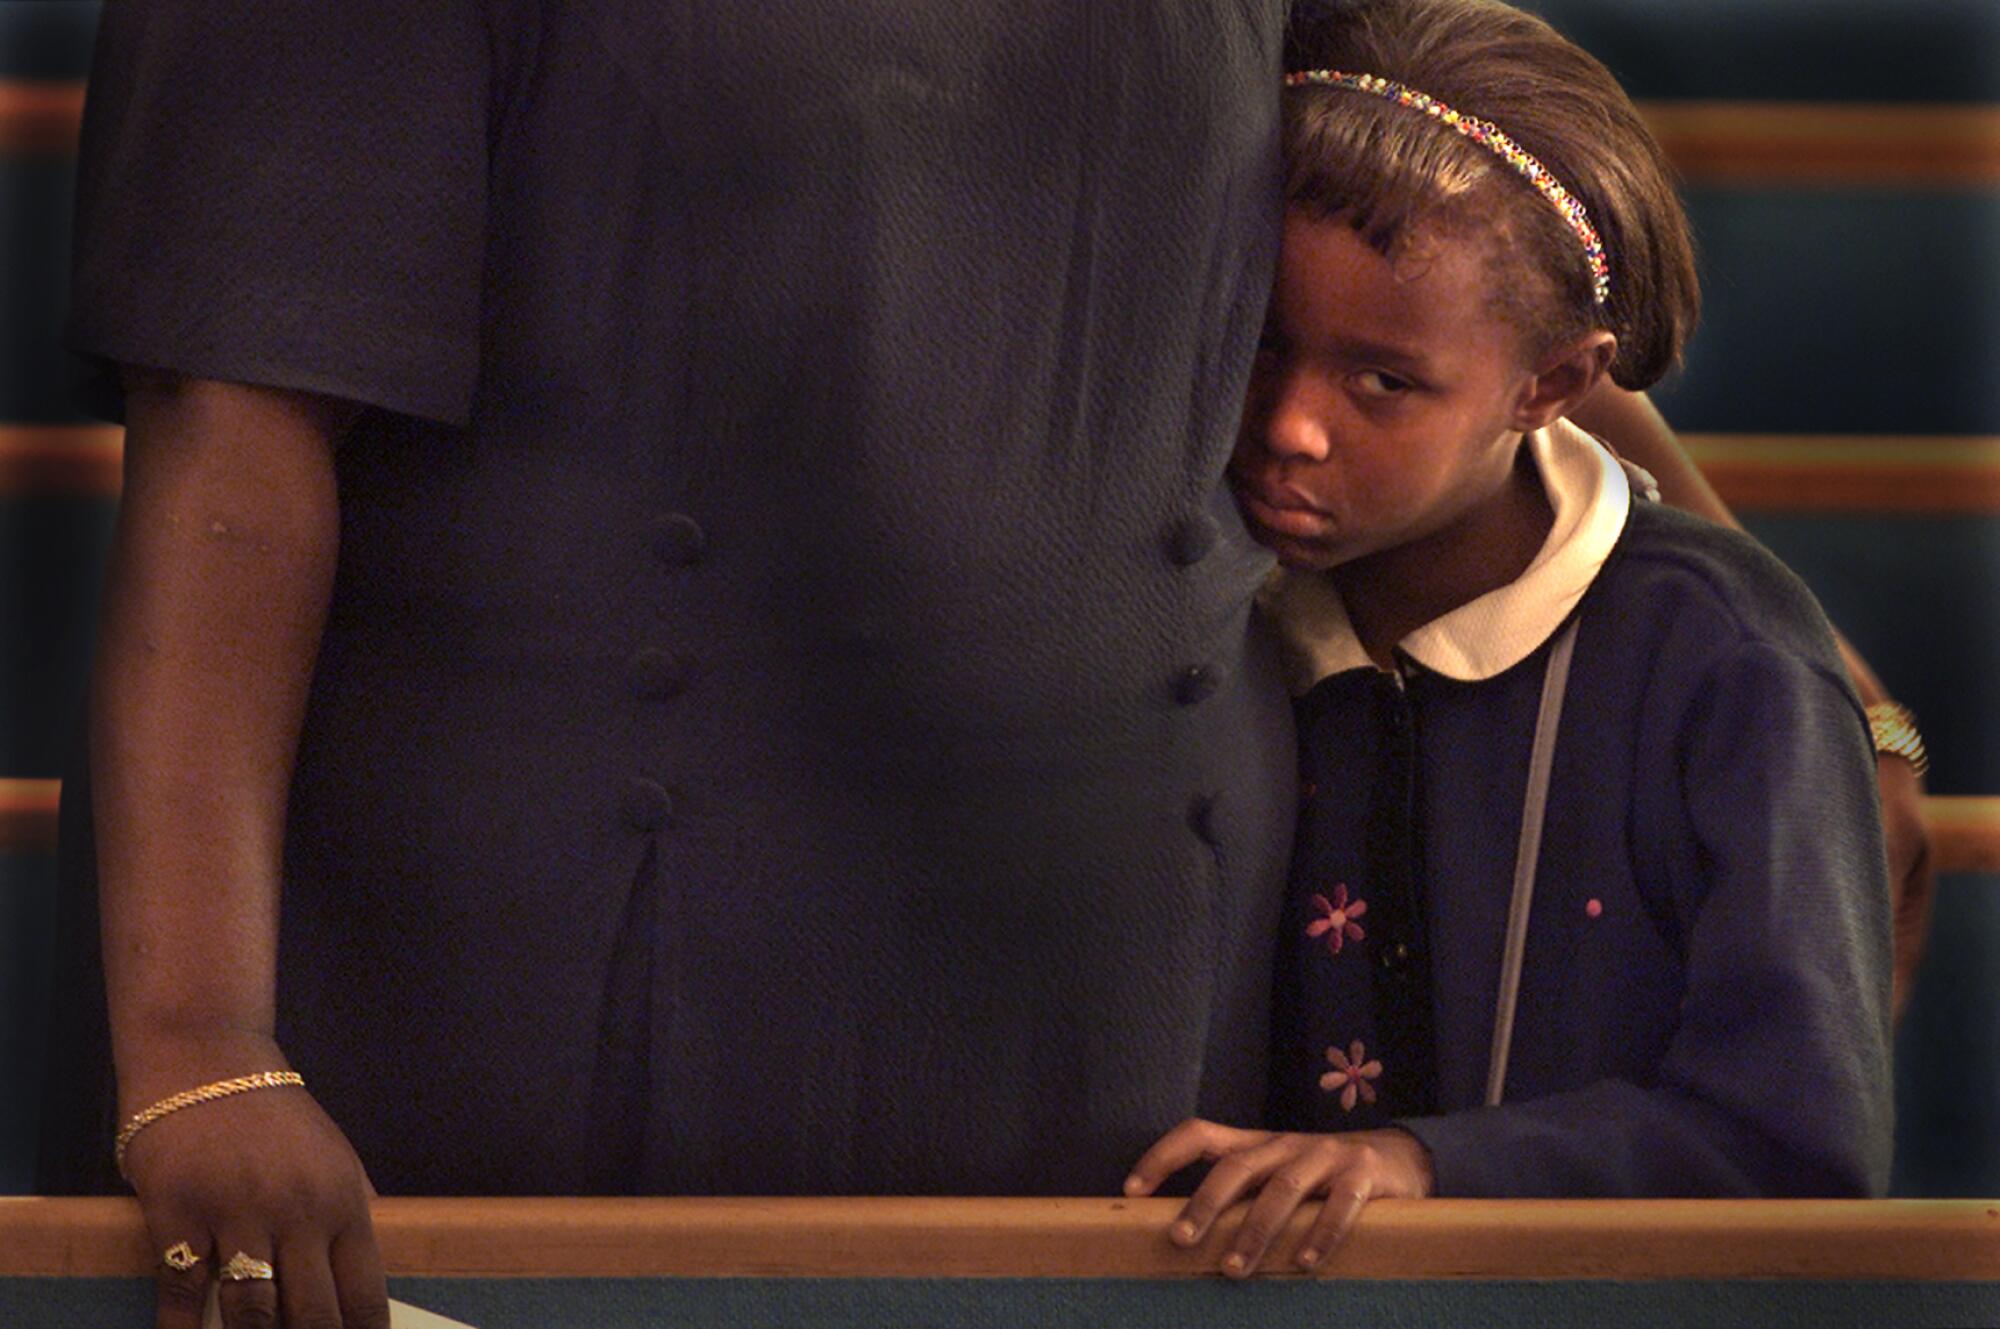 A young girl stands next to her grandmother in church